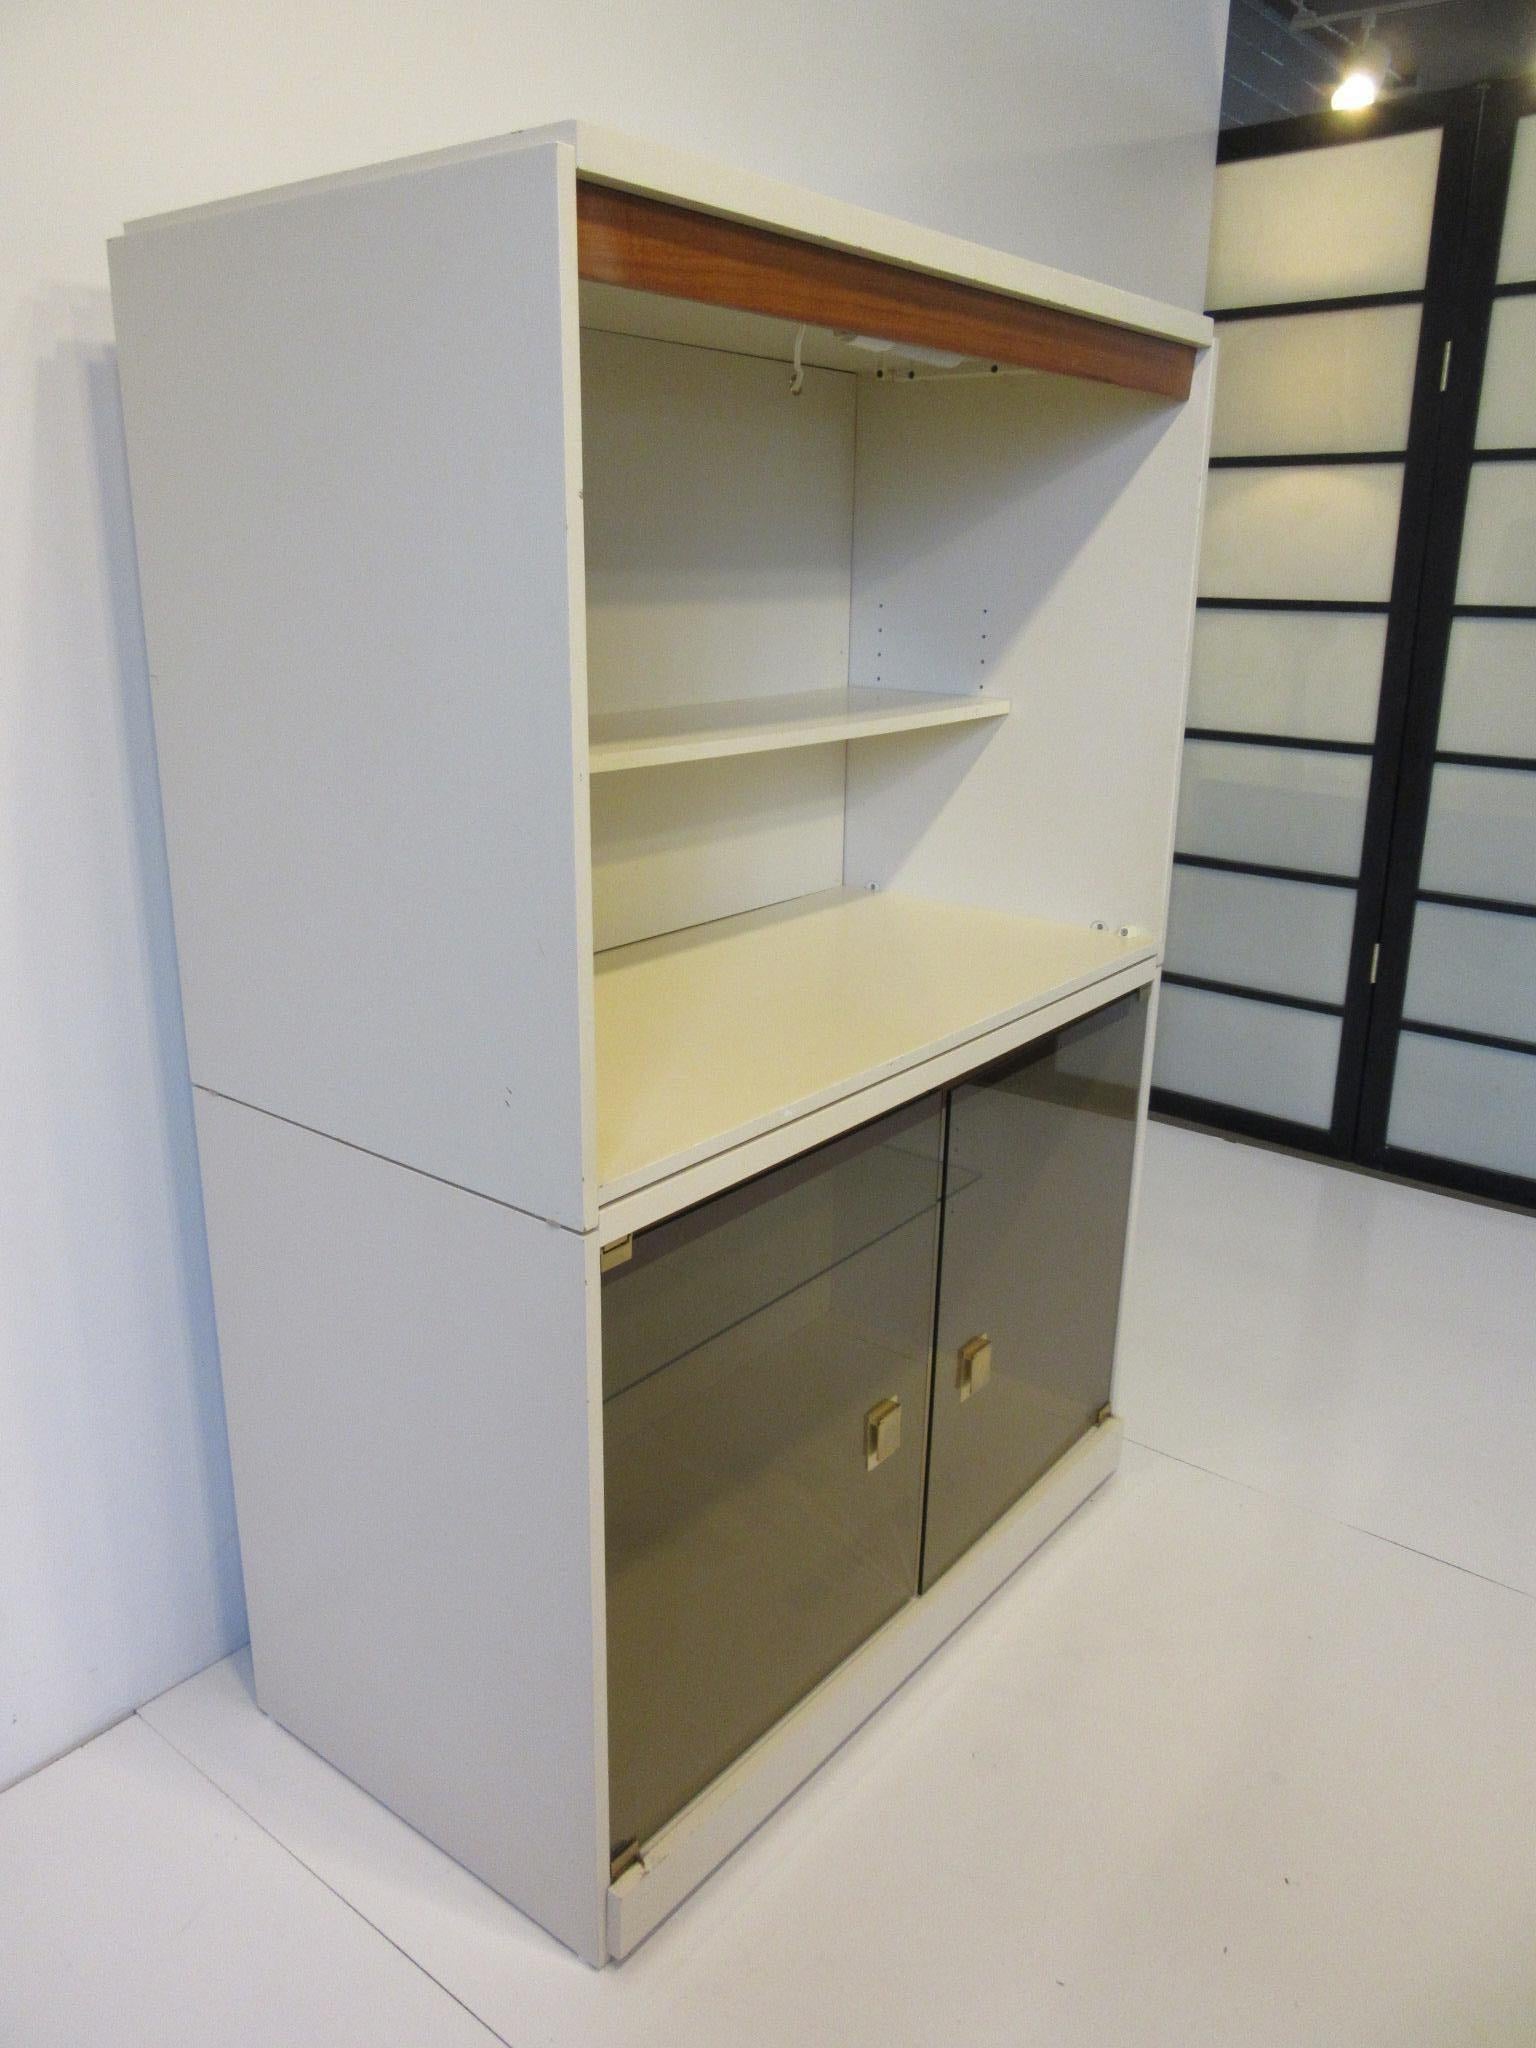 A two-piece cream lacquer finished cabinet or bookcase with adjustable shelves, smoked glass doors, brass pulls, walnut trim and lights to both units. In the manner of Milo Baughman constructed in the 1970s made in Canada.